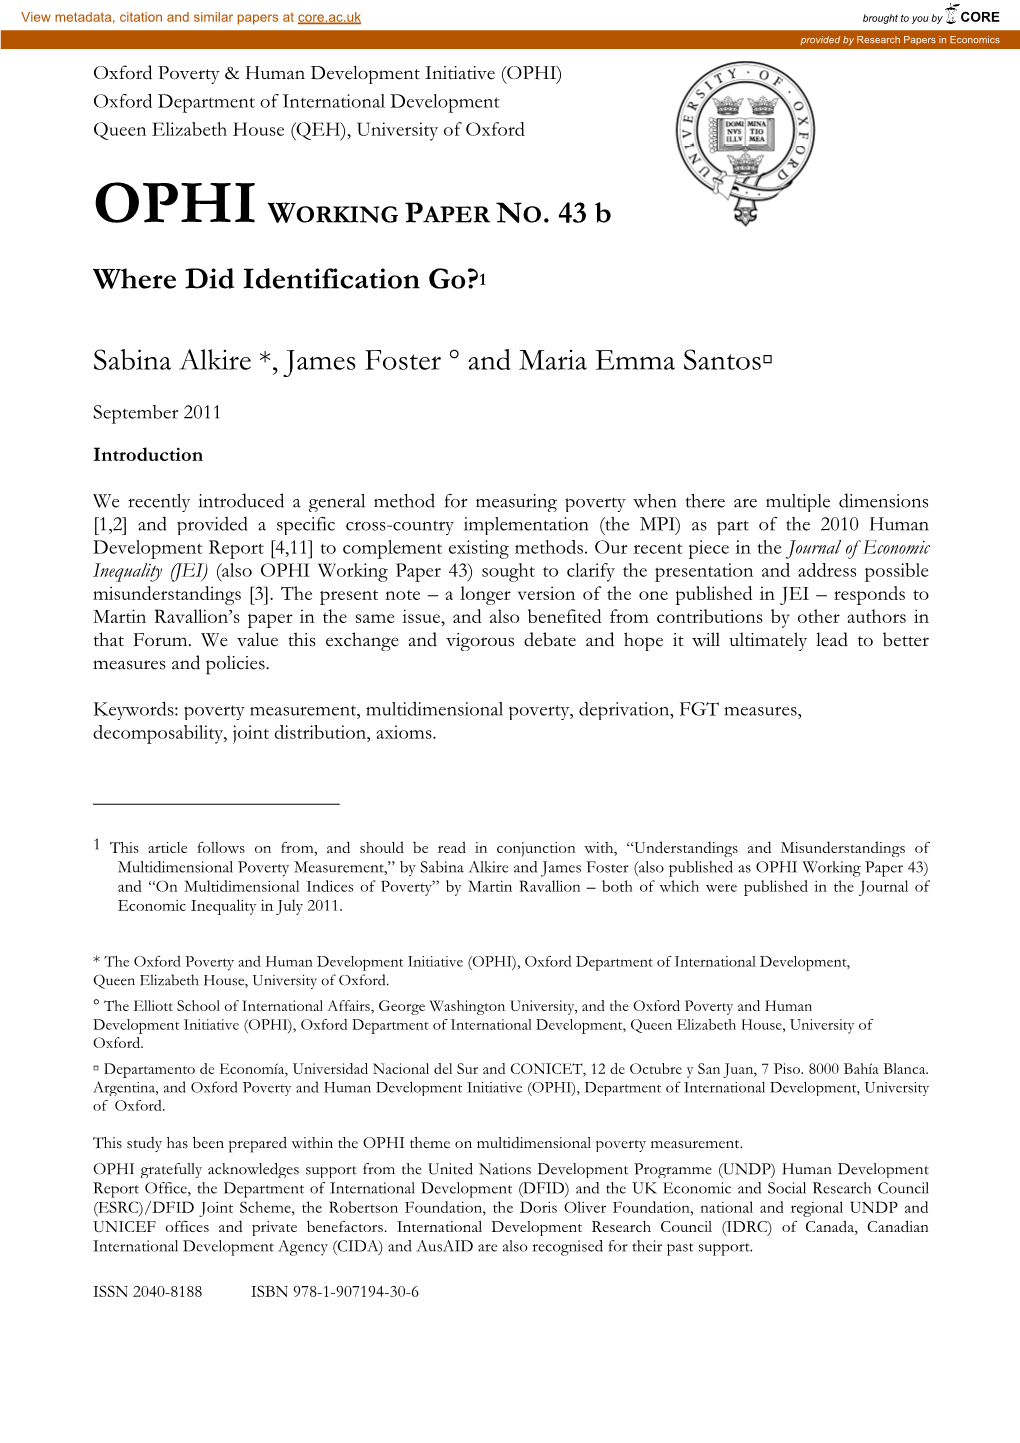 Where Did Identification Go? Sabina Alkire *, James Foster D